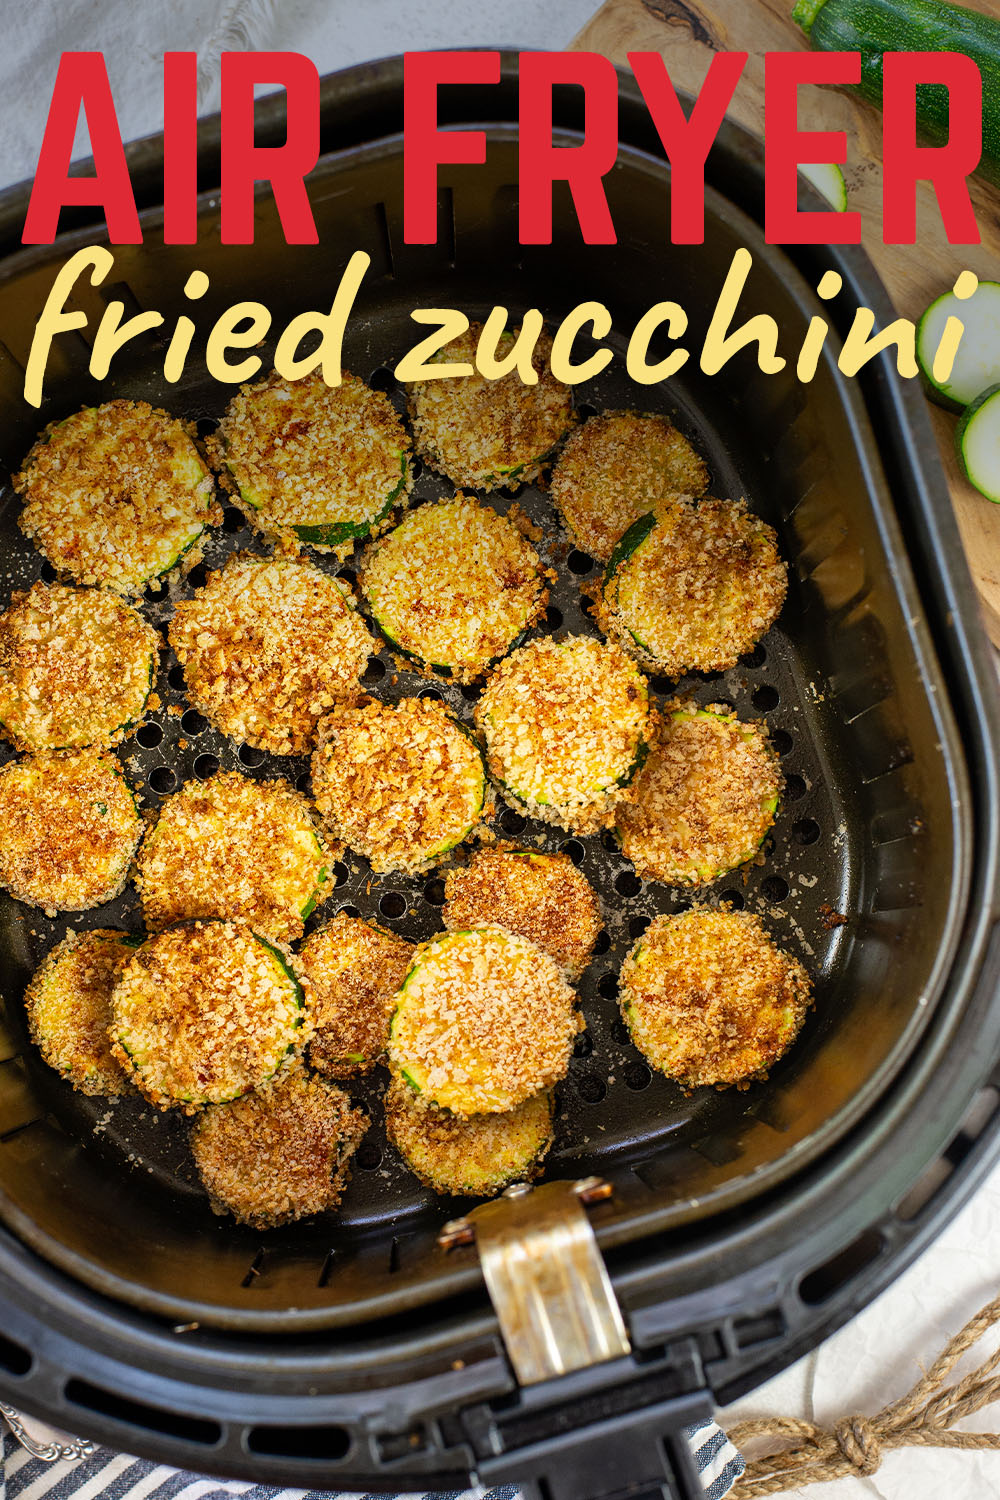 Air fryer zucchini chips come out crispy, cooked perfectly evenly.  The light seasoning is perfect for the zucchini!